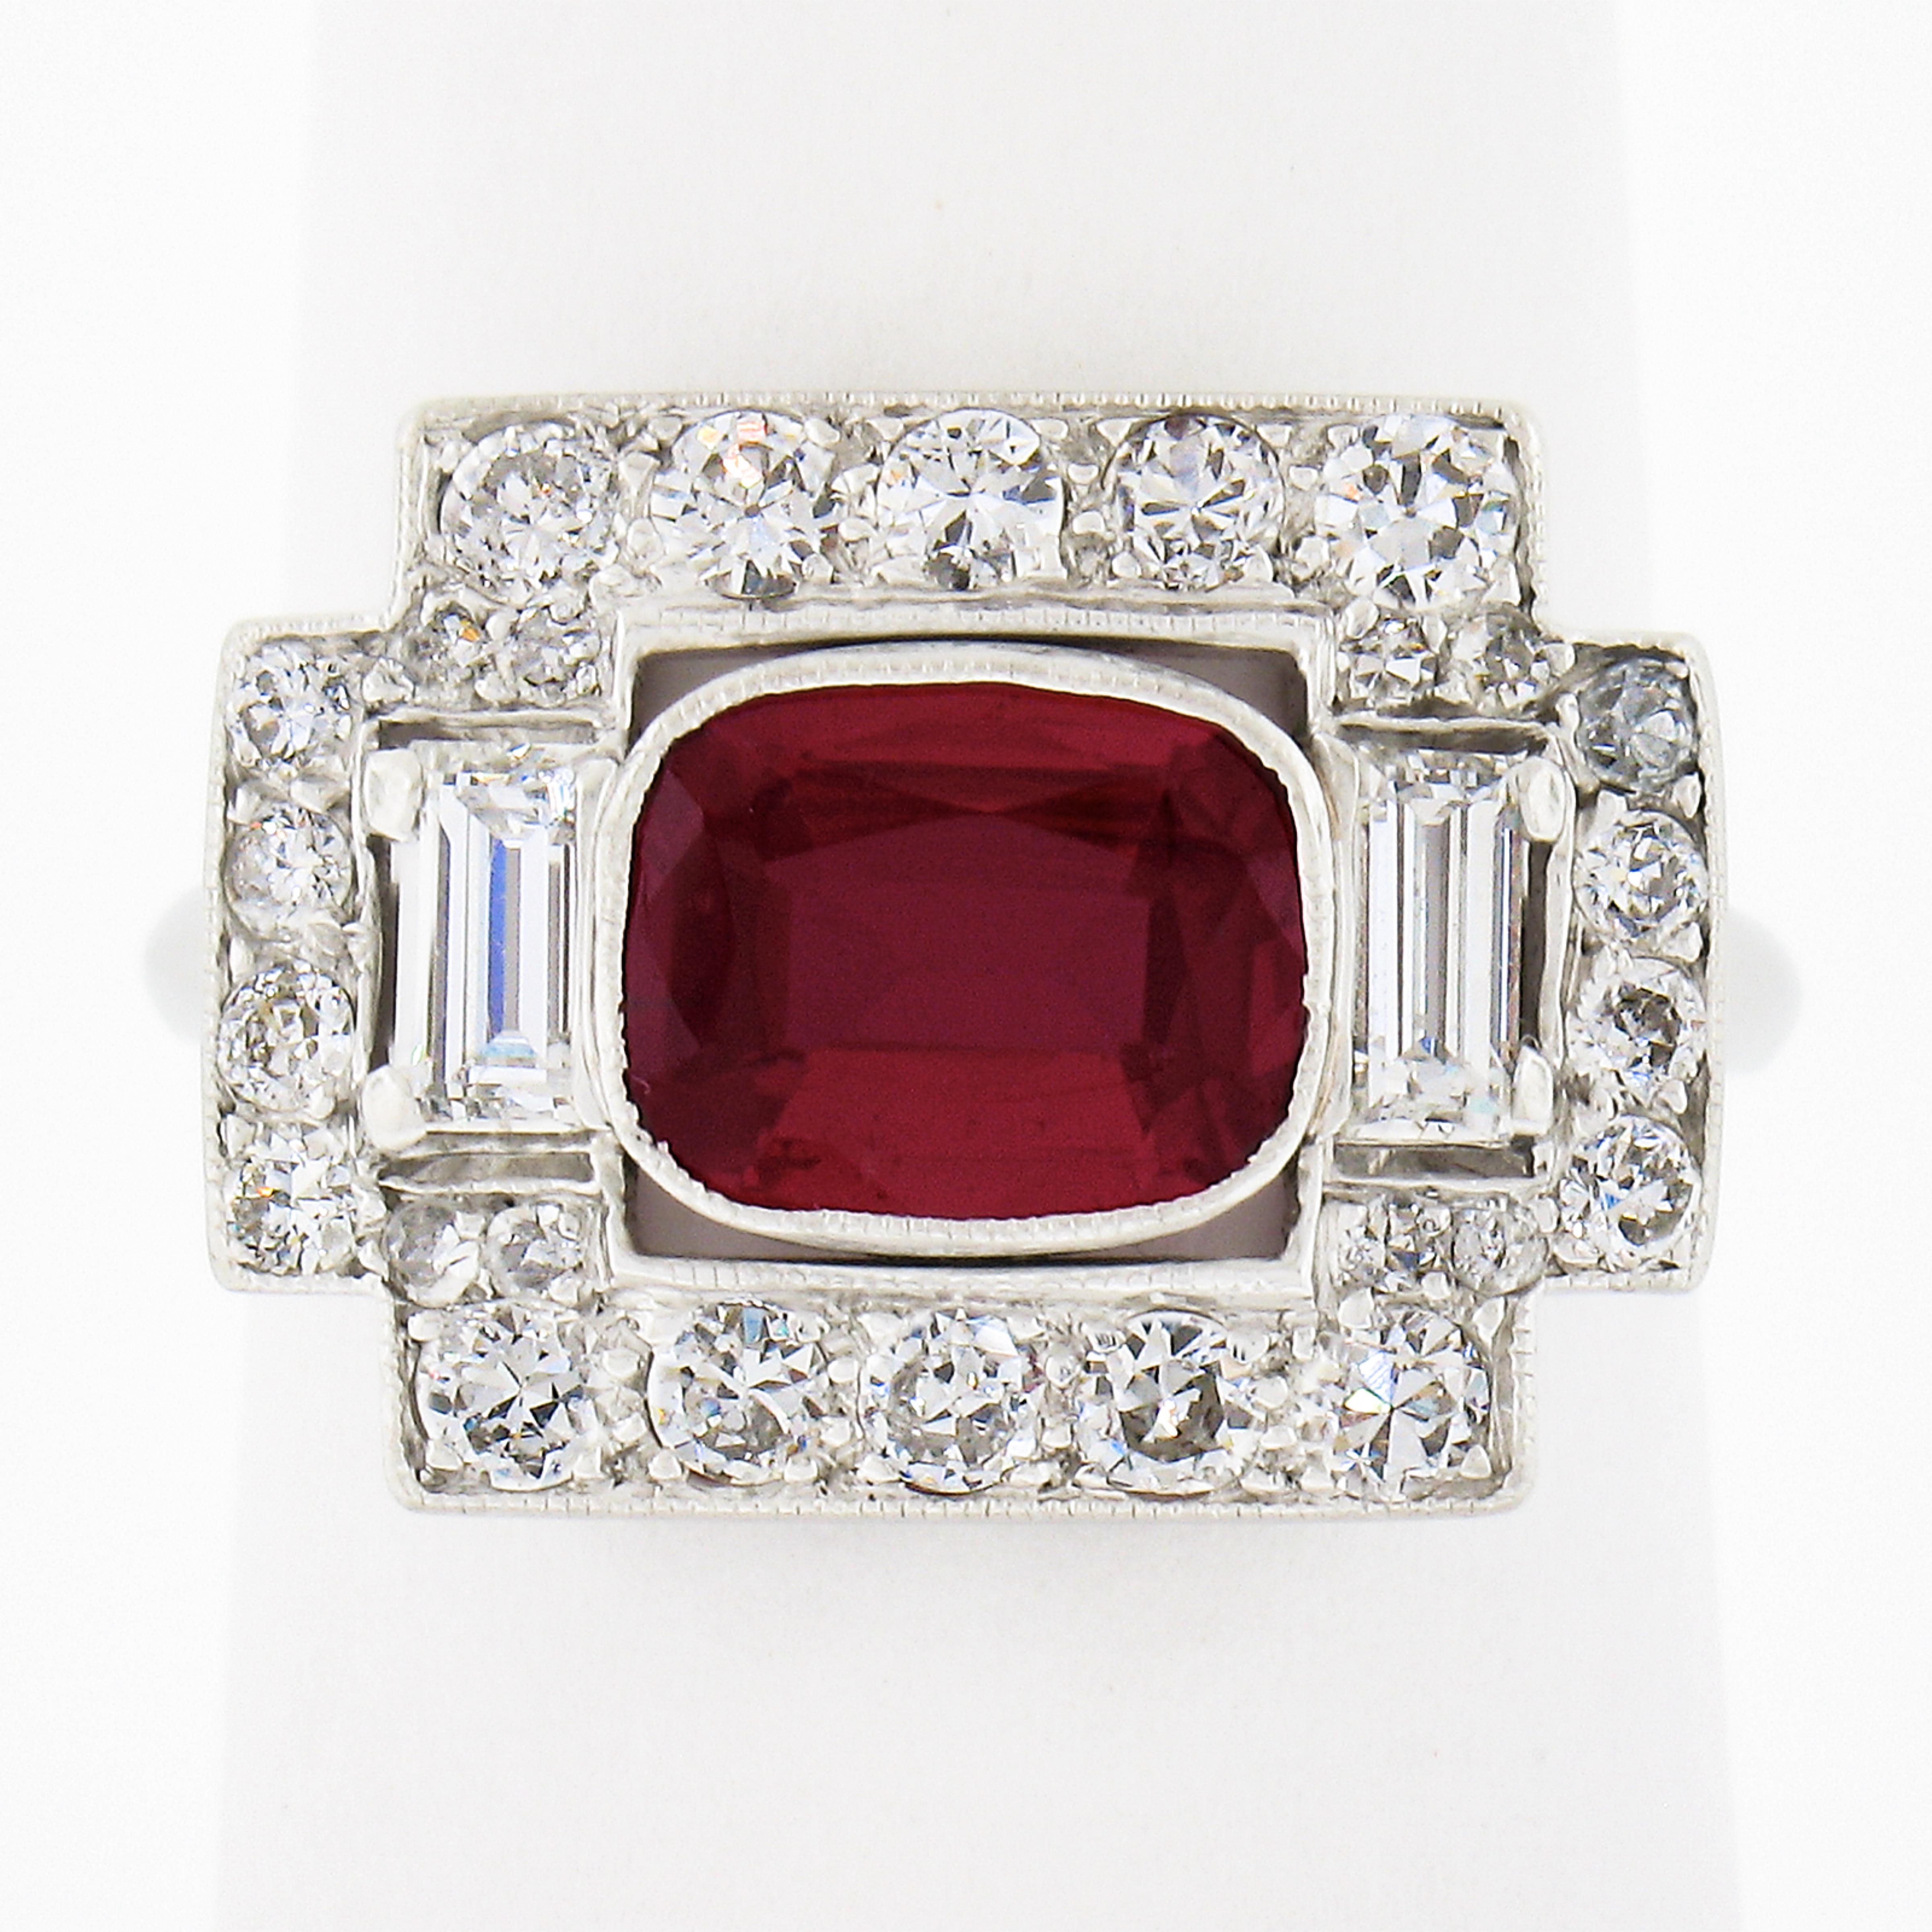 This pure Pigeons Blood red synthetic Ruby is set at the center of a gorgeously designed dinner platter ring and is adorned throughout with icy white old European, single cut and straight baguette diamonds. This exceptional all-original antique